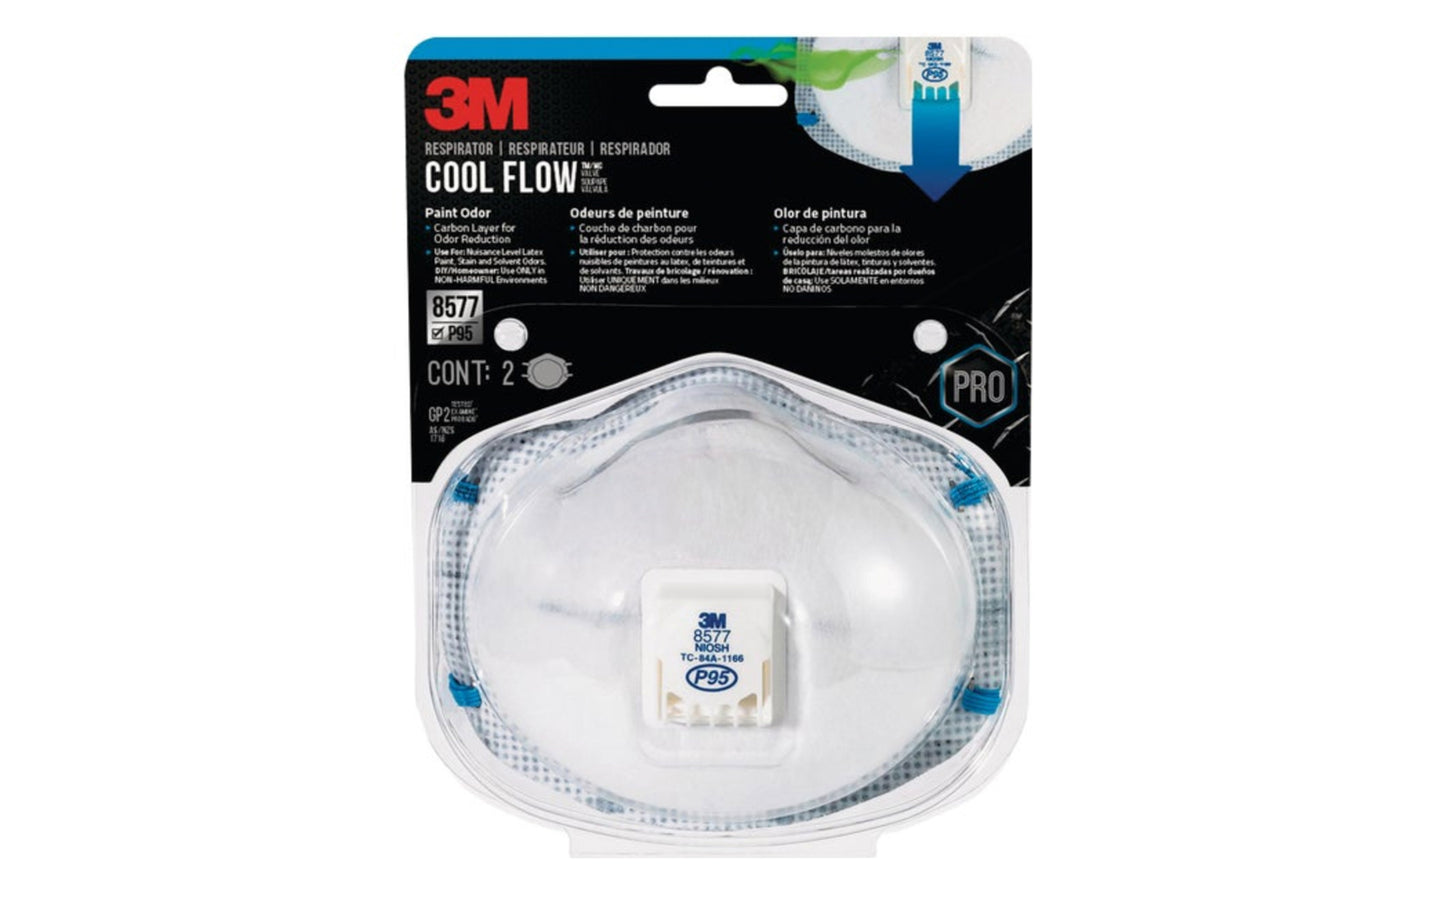 3M Model 8577 - 2 Pack. N95 Rating - 3M N95 Respirator for Paint Odor - 2 Pack. Super comfortable soft material. Fully adjustable fit. N95 Mask With Straps. 051131997660. Equipped with a carbon layer, helps filter out airborne particles plus nuisance levels of organic vapors found in certain paint or adhesive